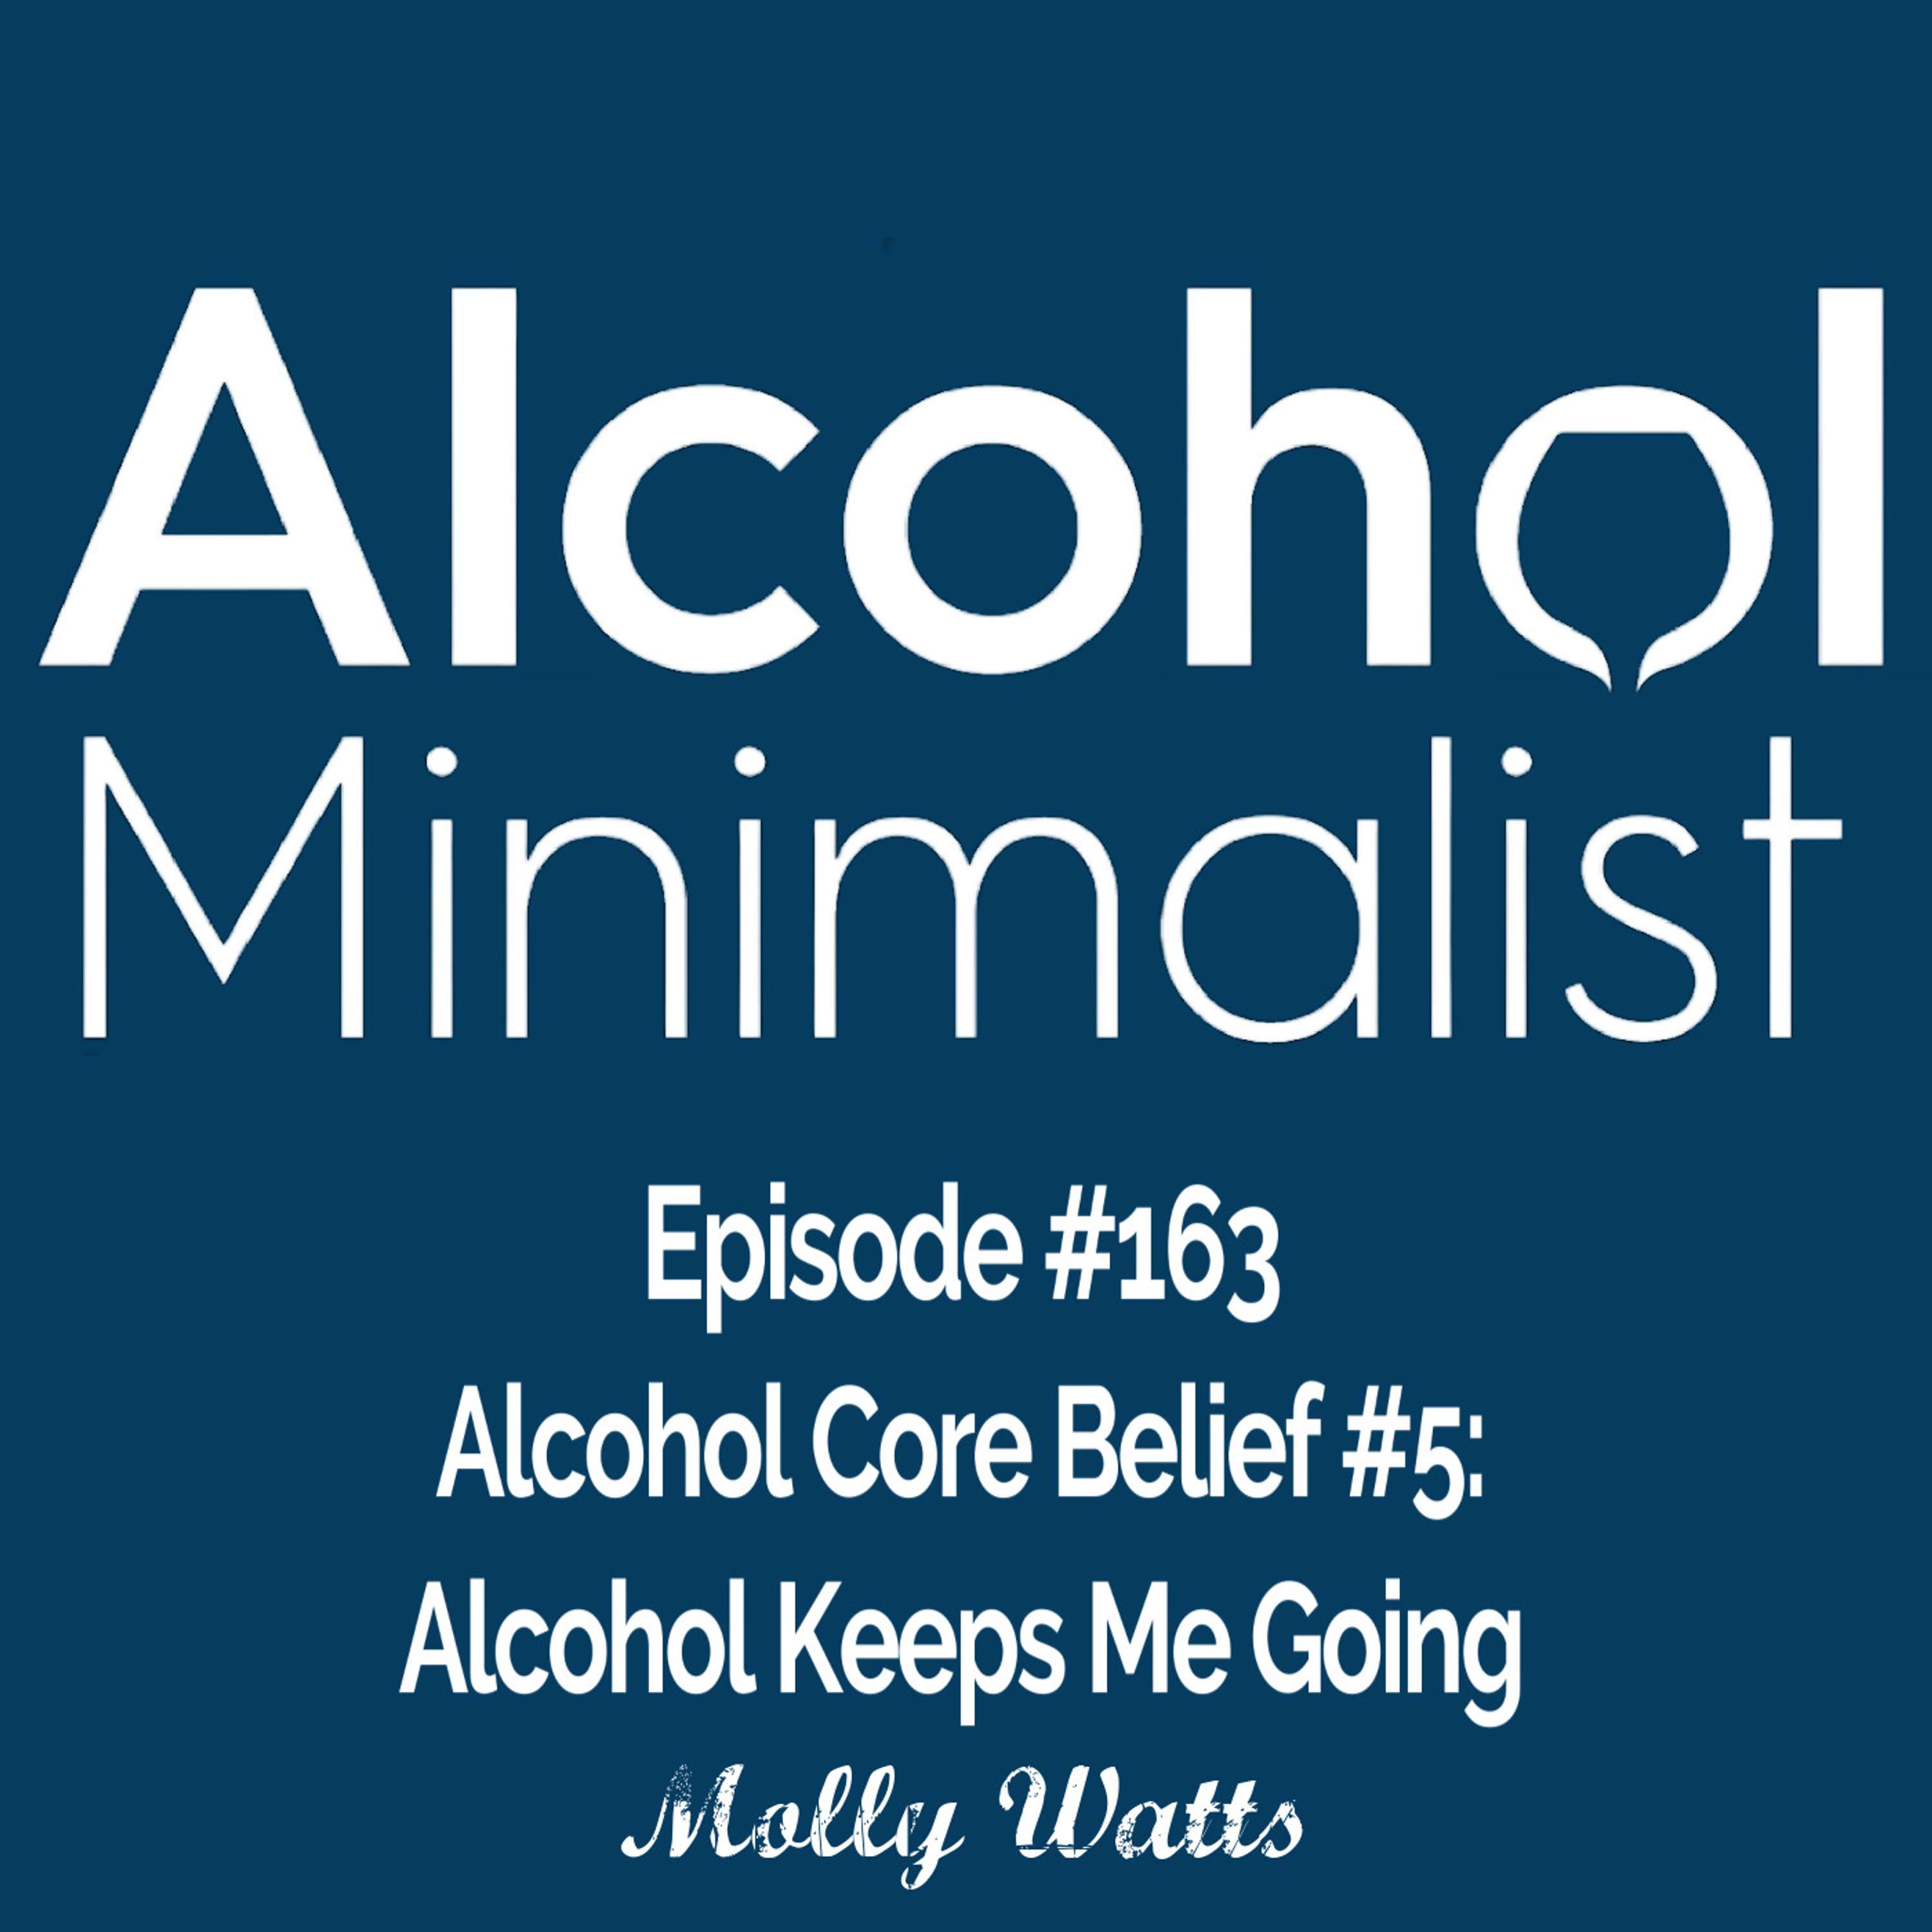 Alcohol Core Belief #5: Alcohol Keeps Me Going